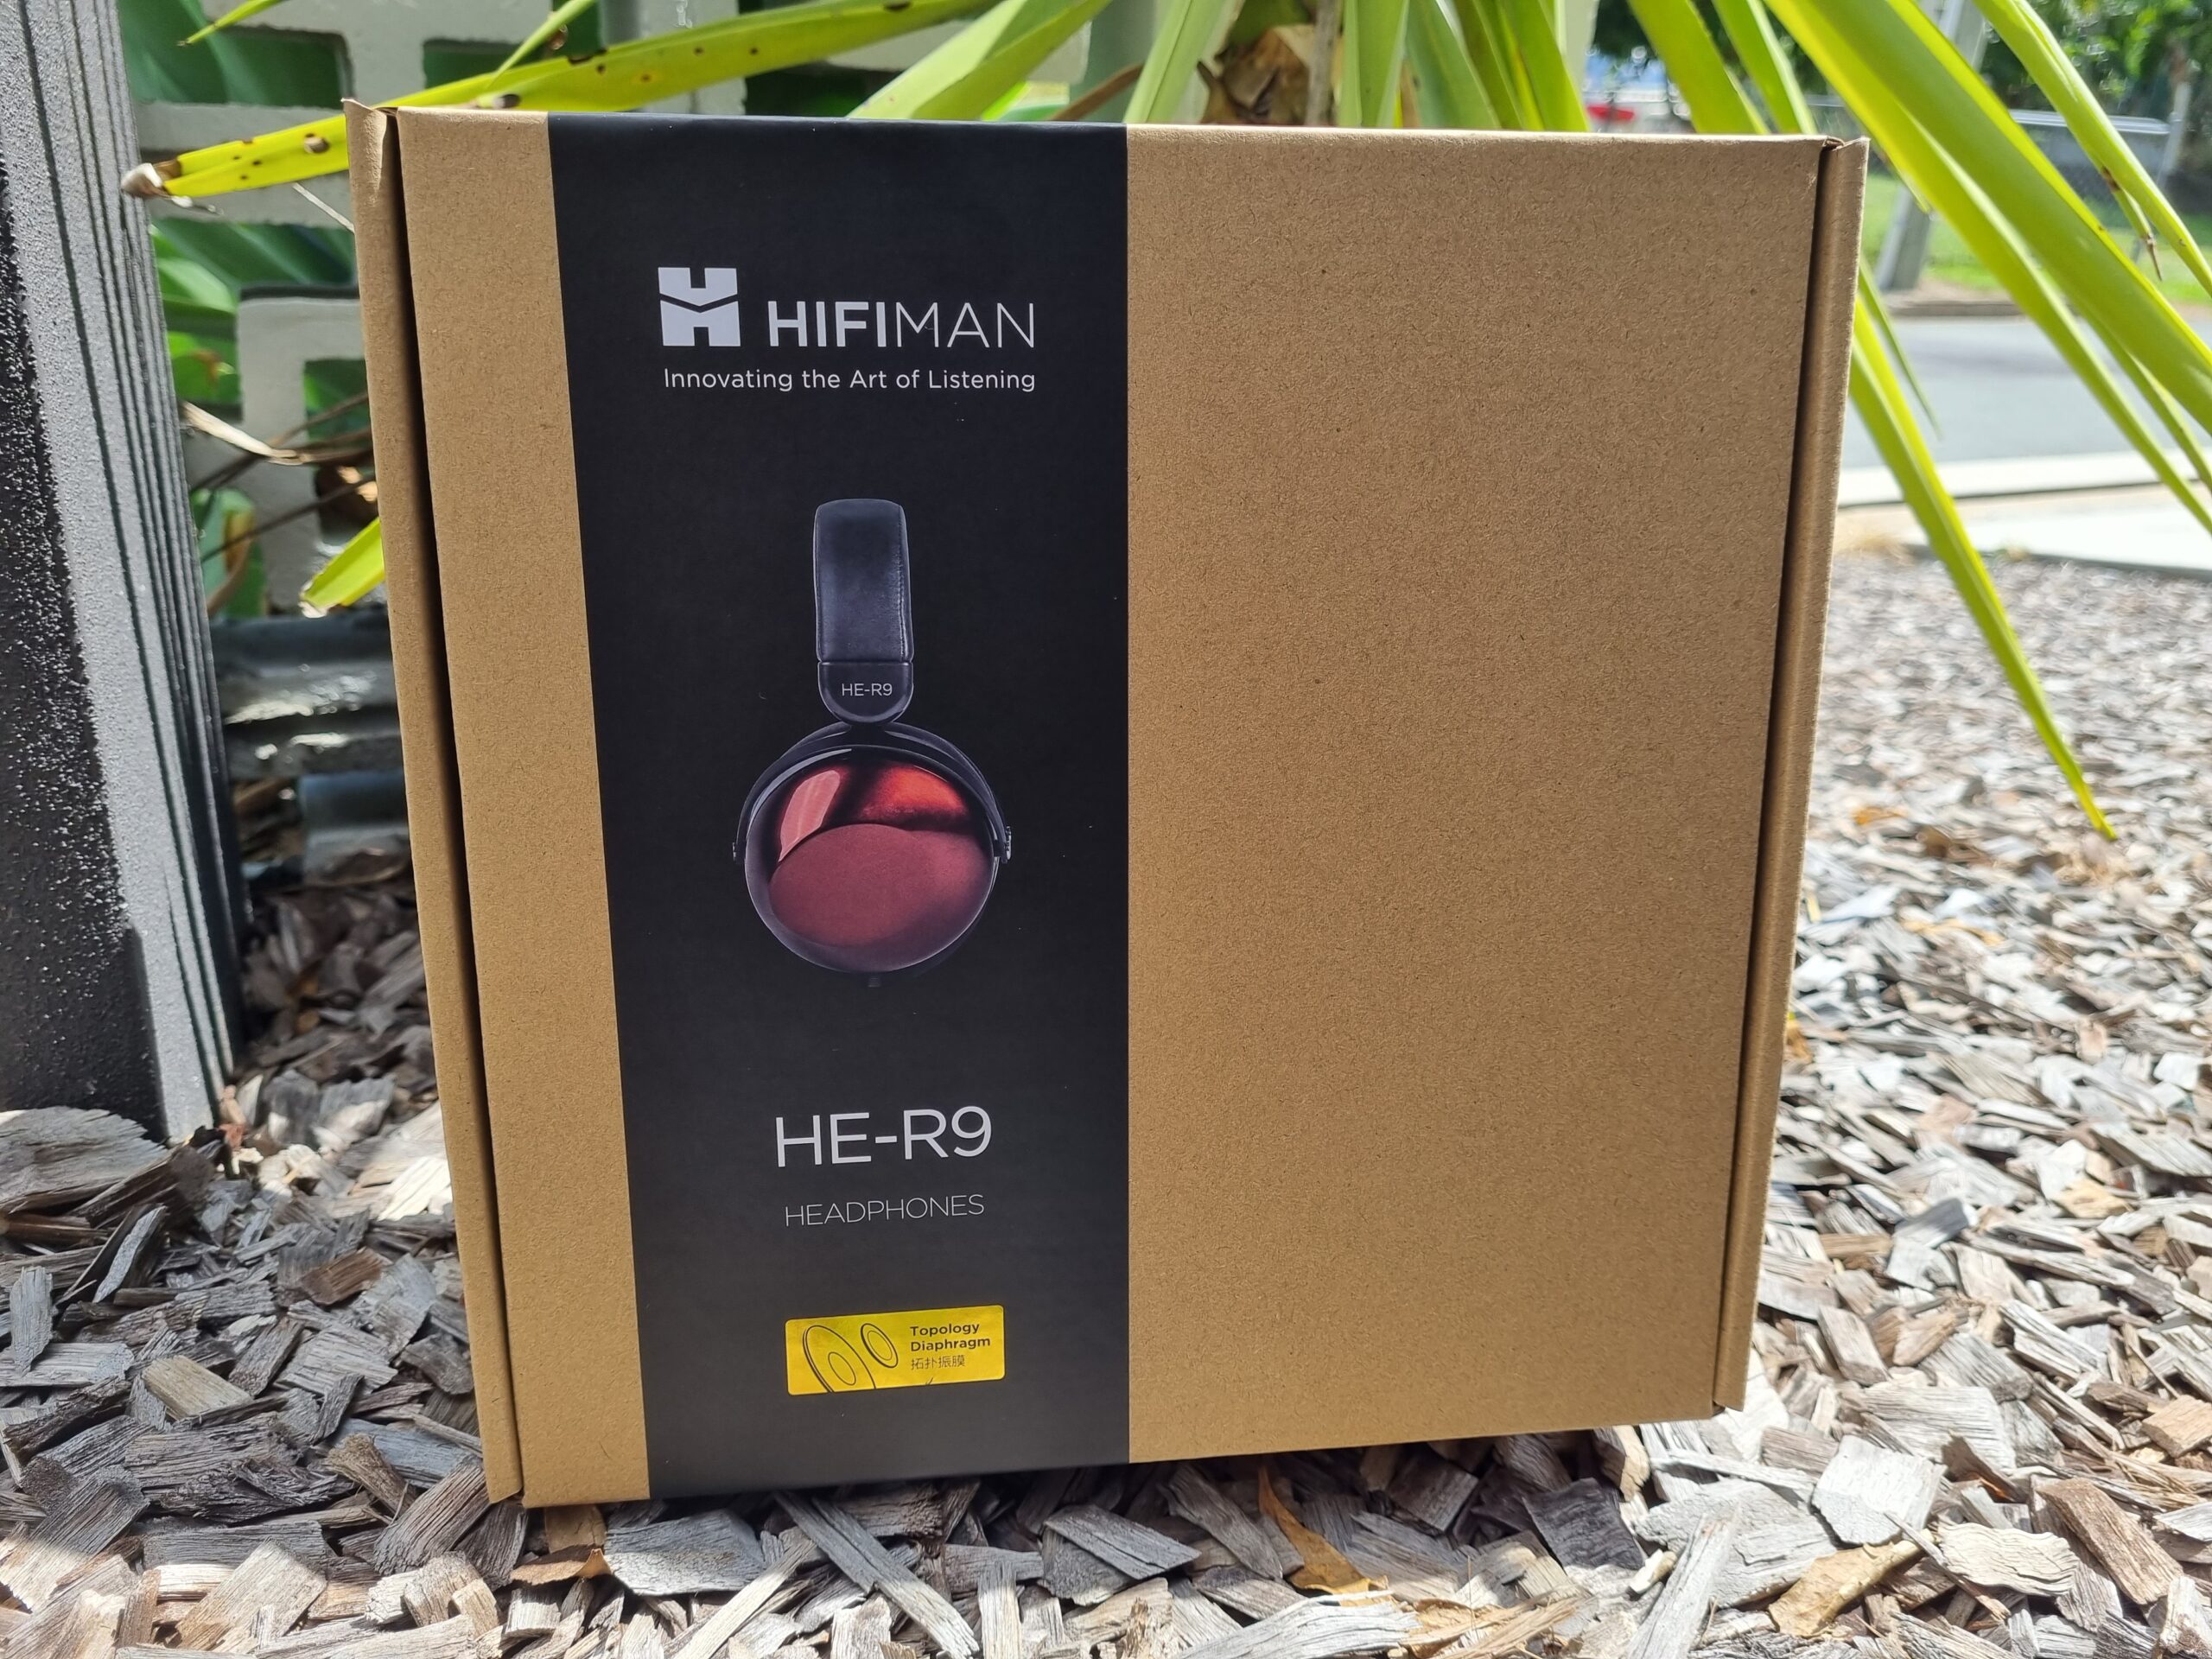 Hifiman RE9 in box on pebbles outdoors in front of a potted plant